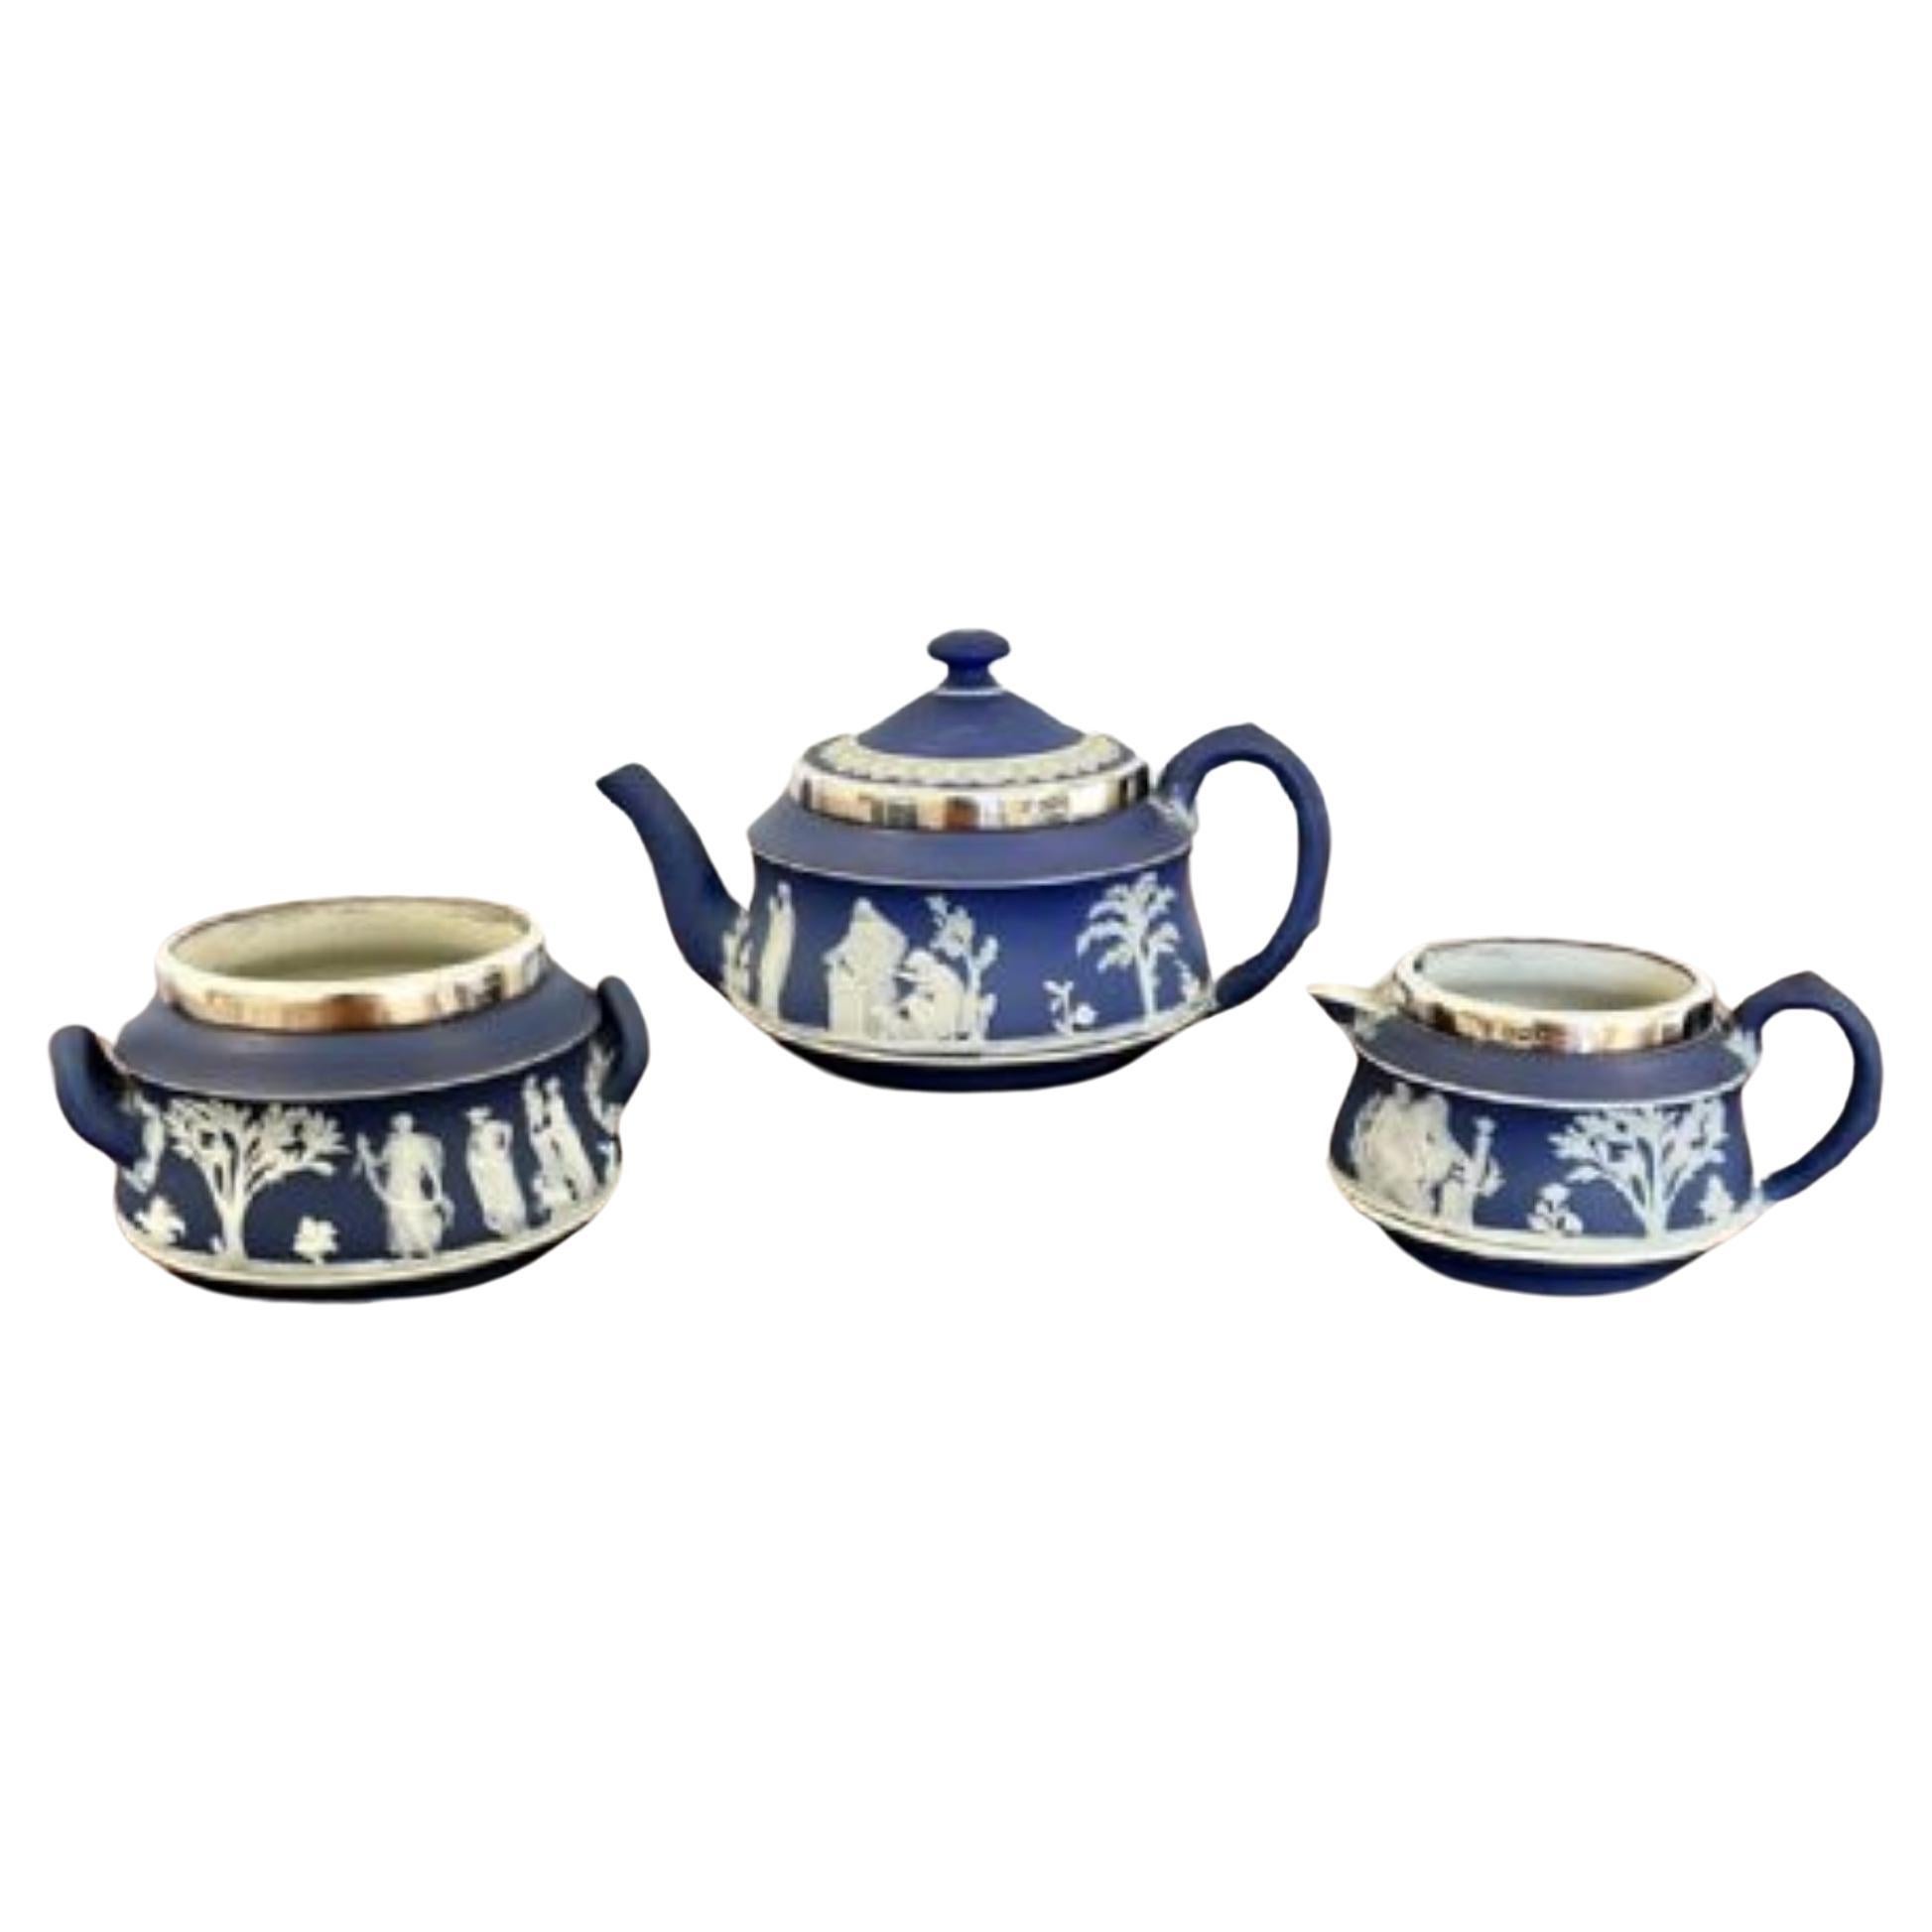 Quality antique Victorian silver mounted three piece Jasperware Wedgwood tea set For Sale